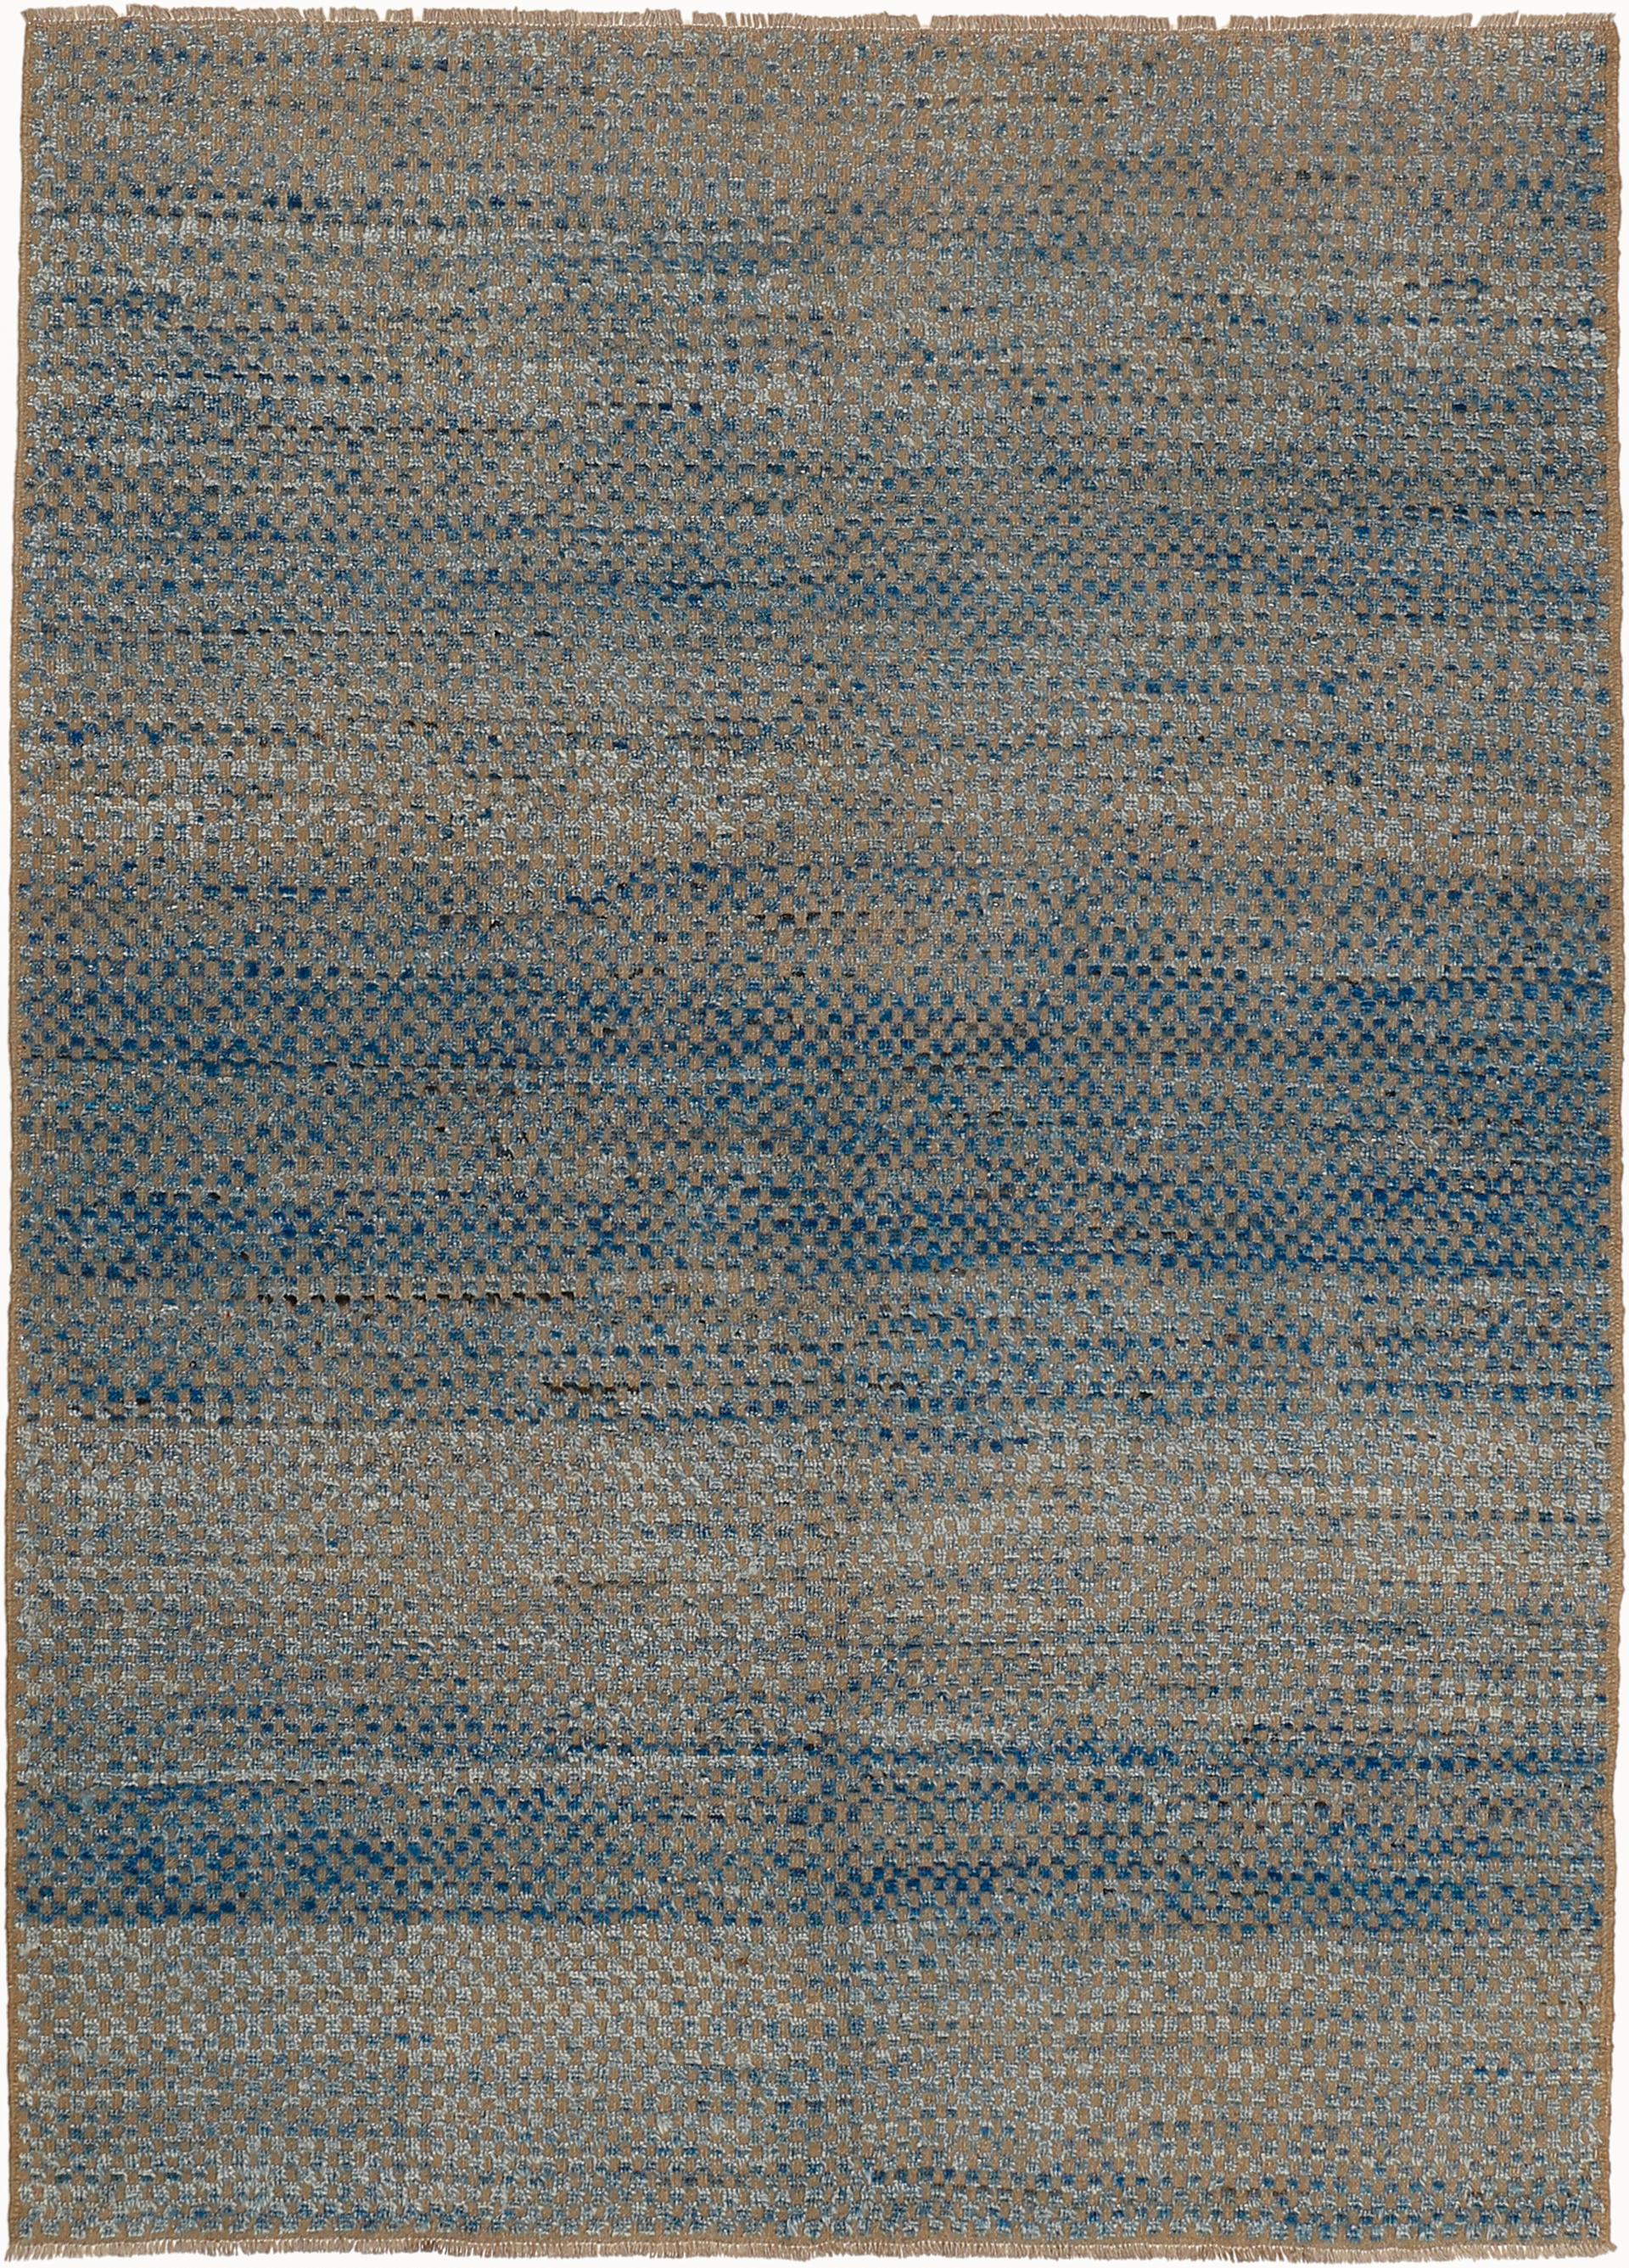 Tuareg Blue represent perhaps one of the gallery's most significant contemporary Moroccan recreations. Hand-knotted with silky hand-spun Ghazni Afghan wool, it represents an irregularly arranged chequerboard pattern characterised by a plethora of